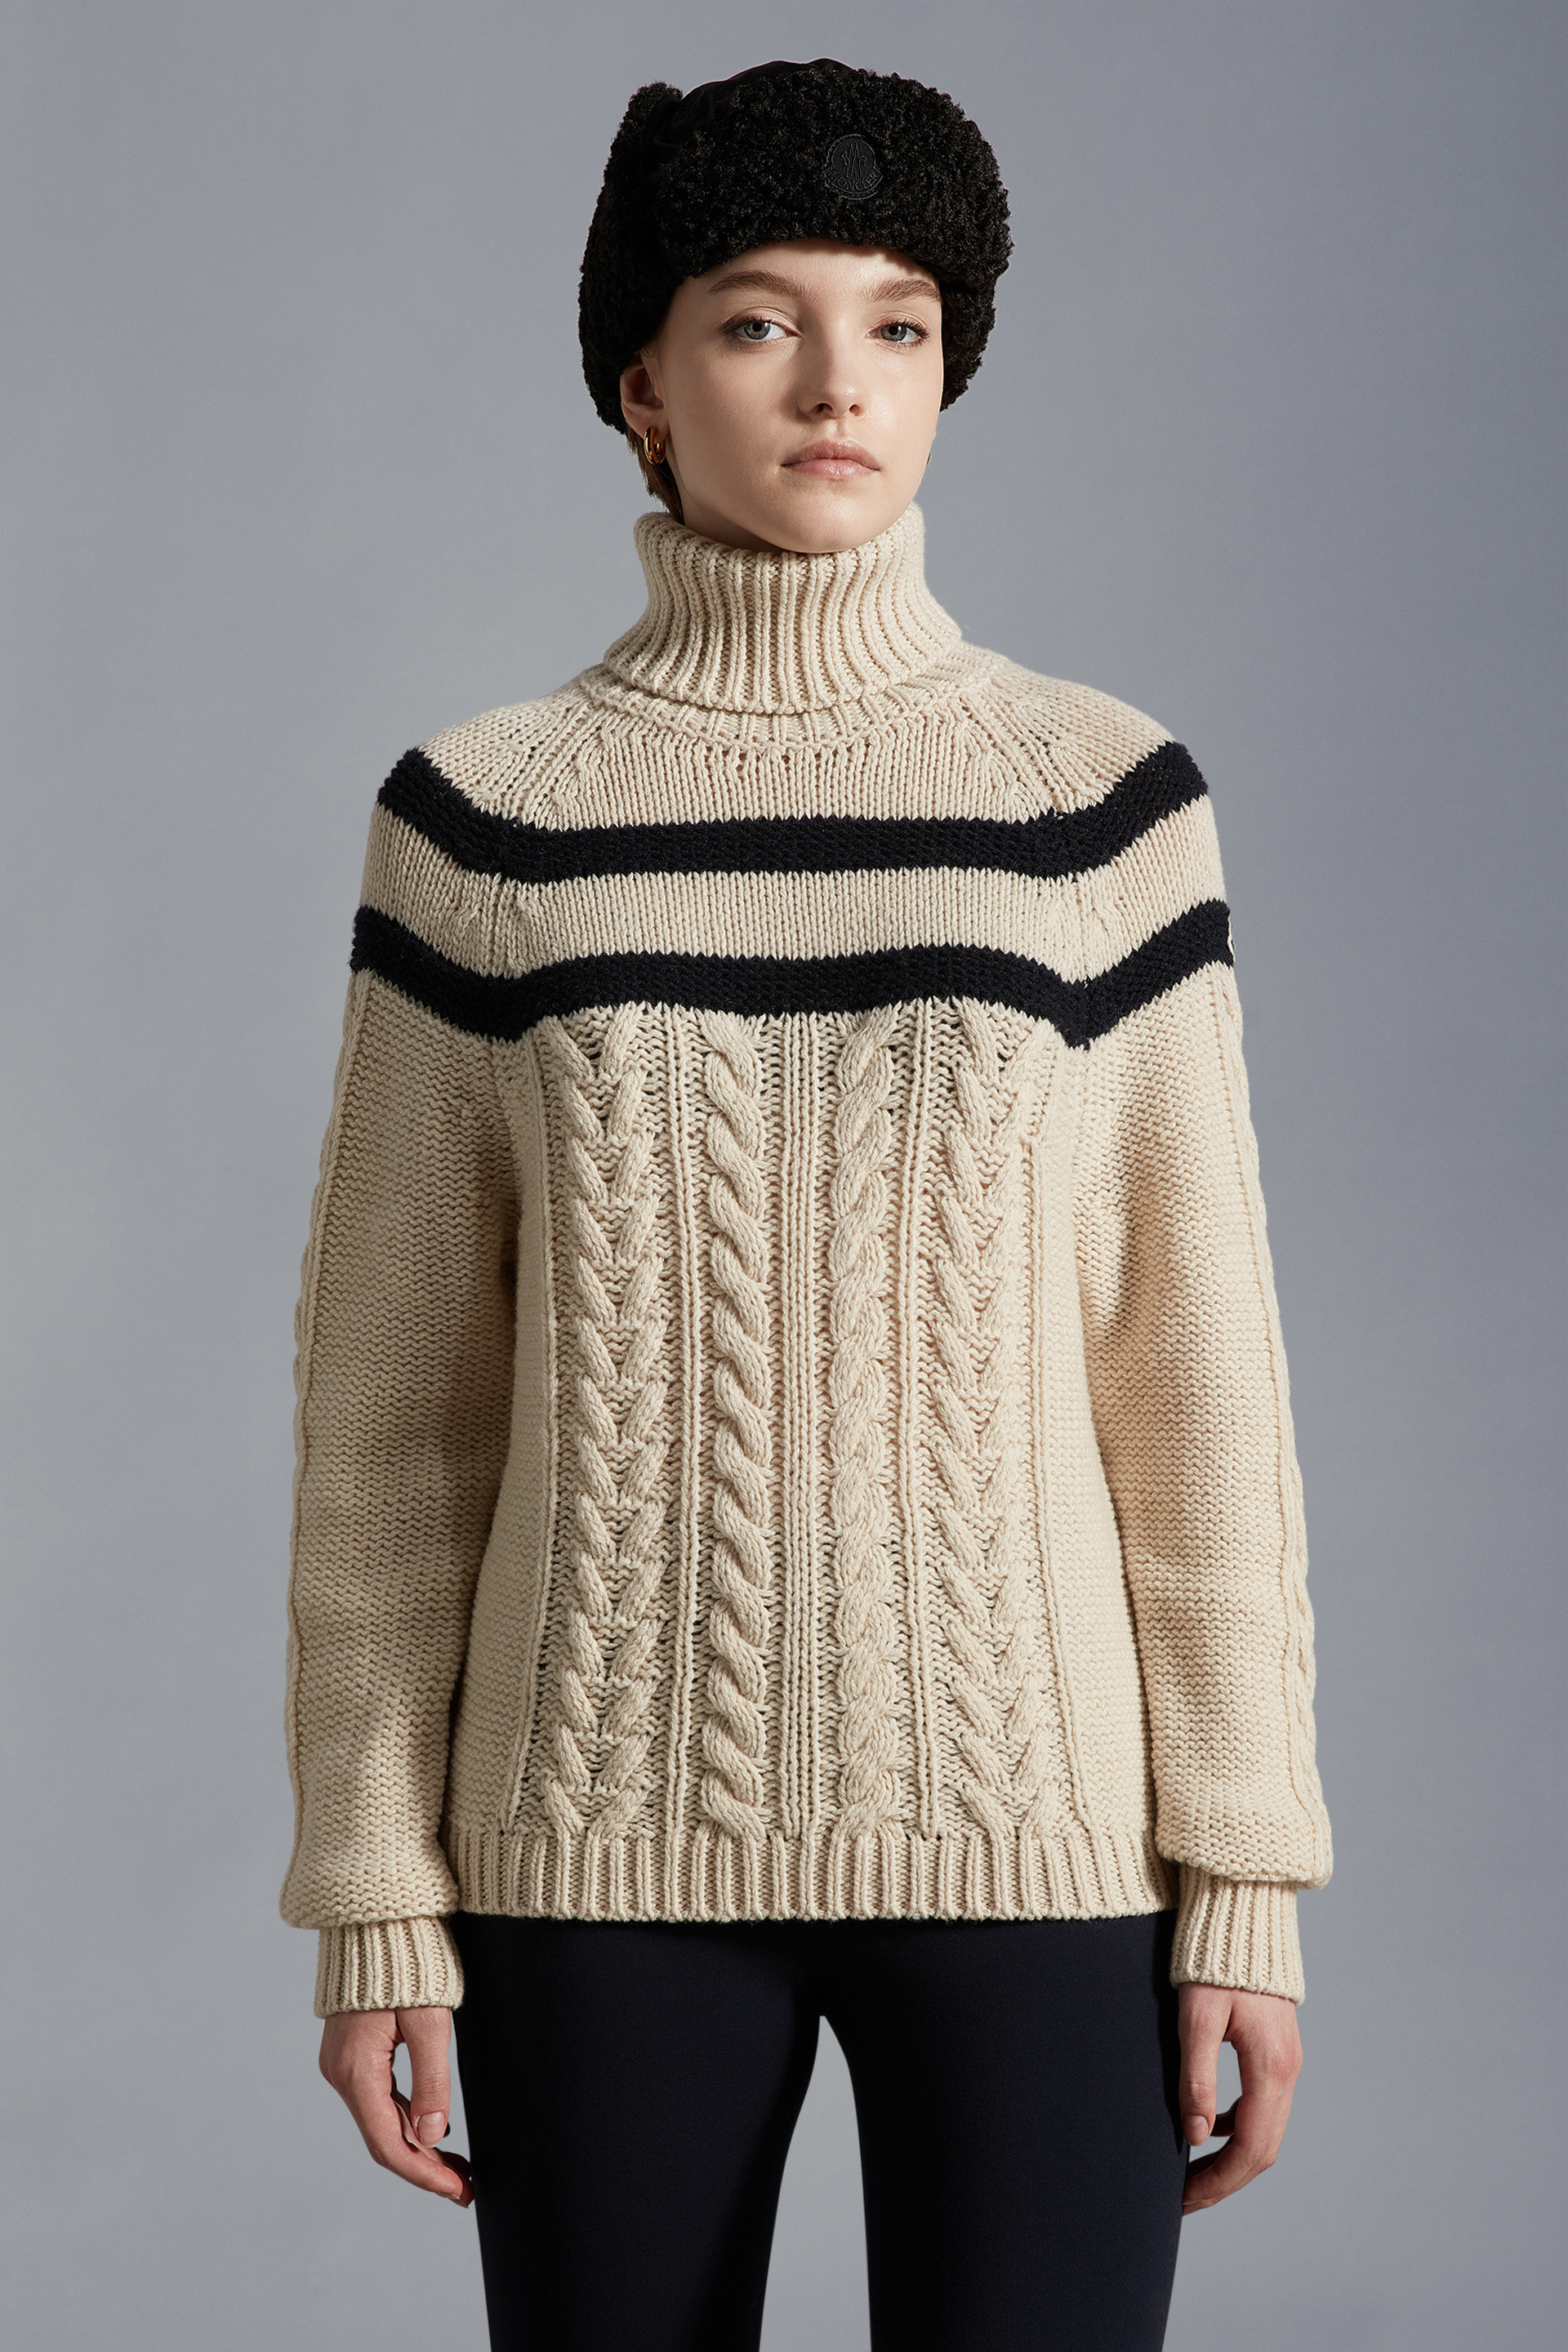 Moncler Genius 2 Moncler 1952 Cotton-blend Cardigan in Beige Womens Jumpers and knitwear Moncler Genius Jumpers and knitwear White 